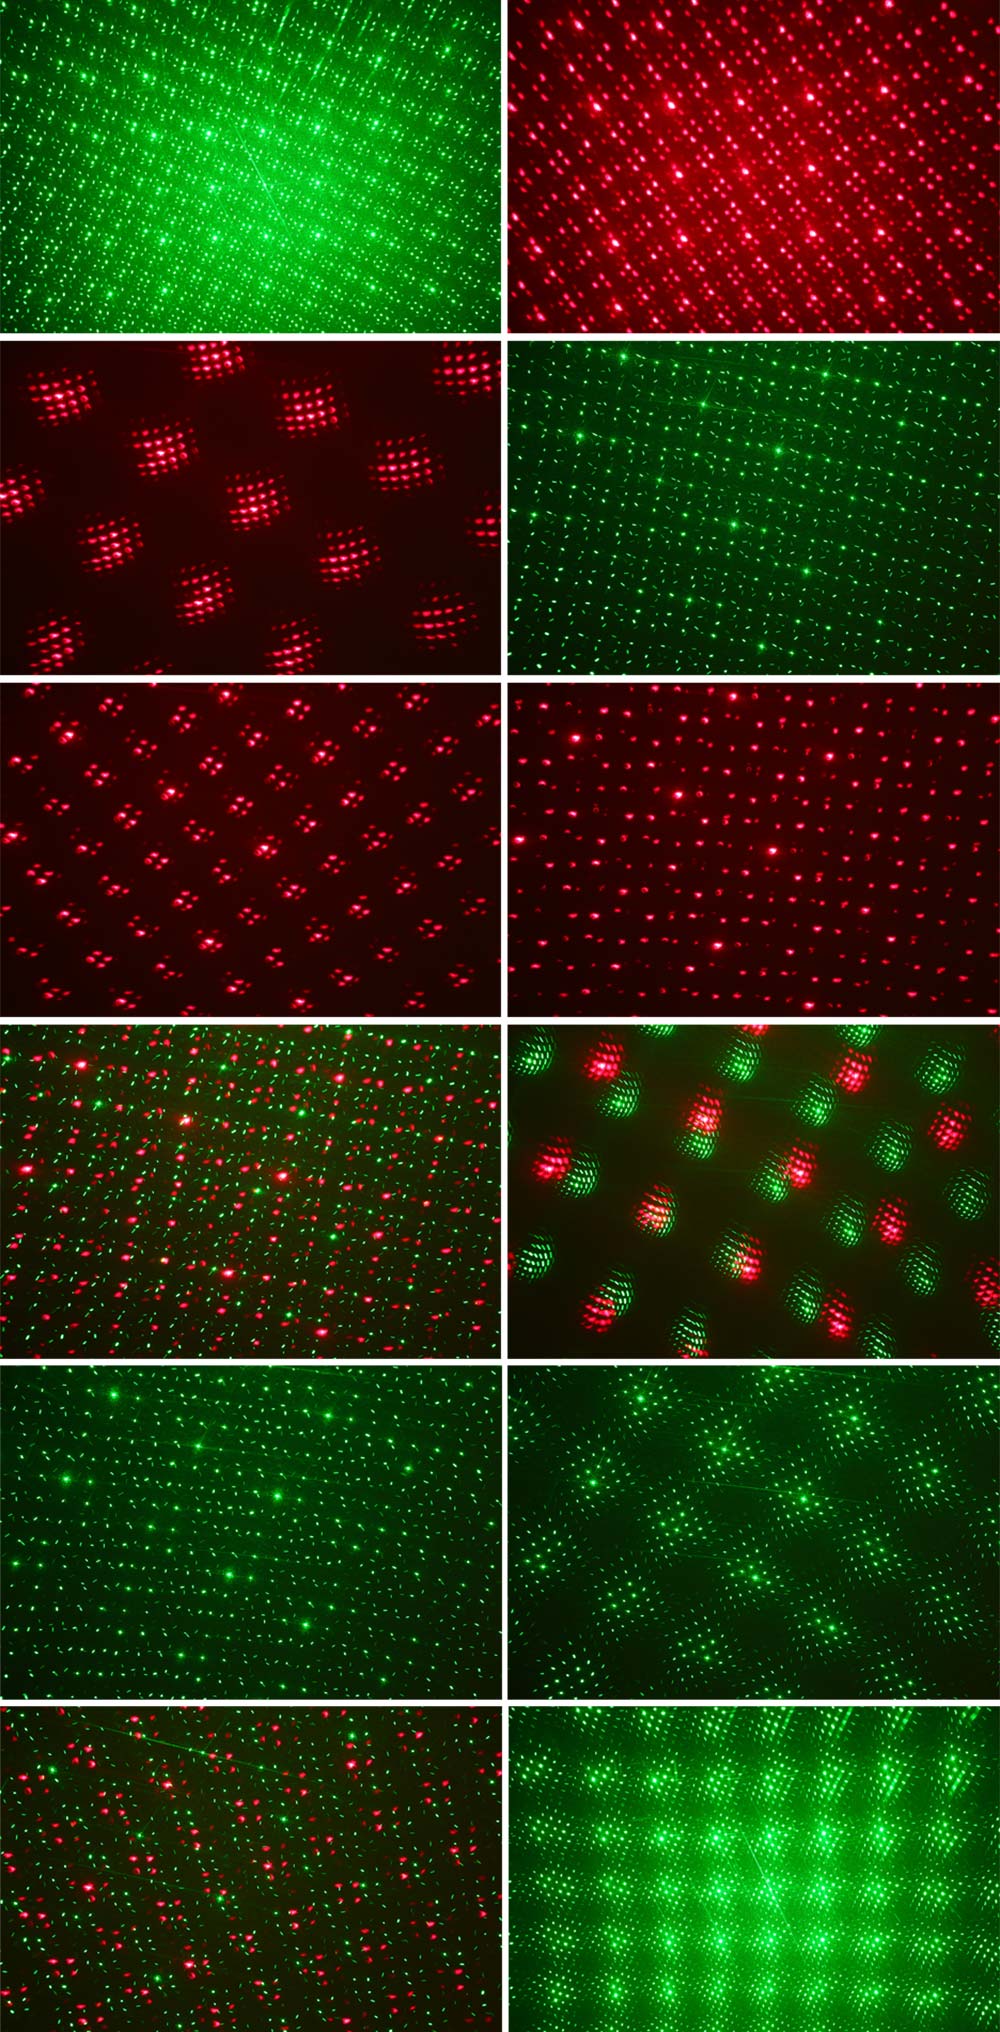 LED Red Green Laser Projector Light for Outdoor Lawn Garden Wall Decoration